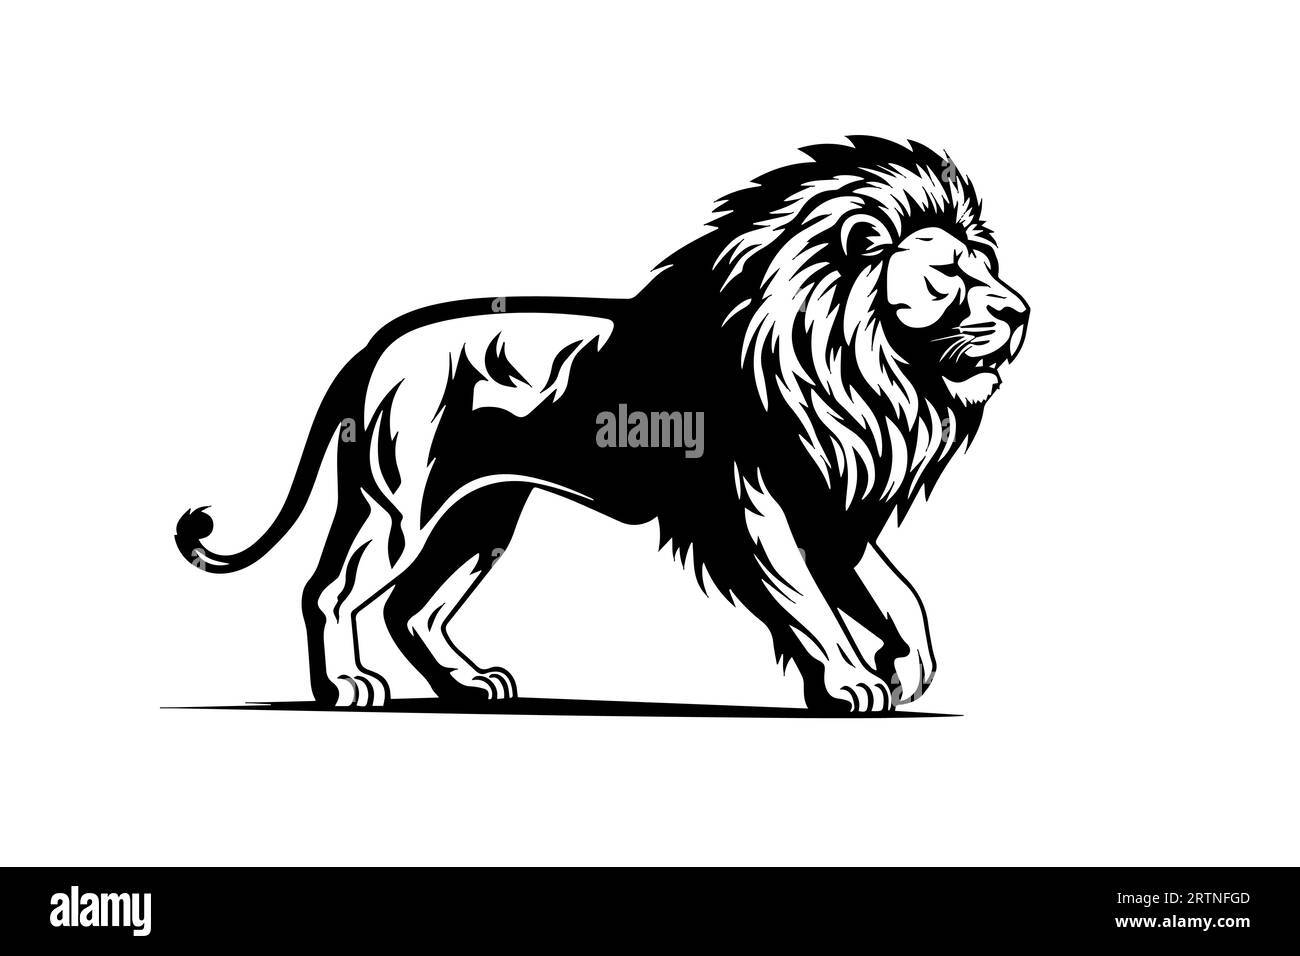 Lion Hand drawn illustration for tattoo , logotype, emblem design. Engraving of wild cat. Vintage sketch style image. Stock Vector